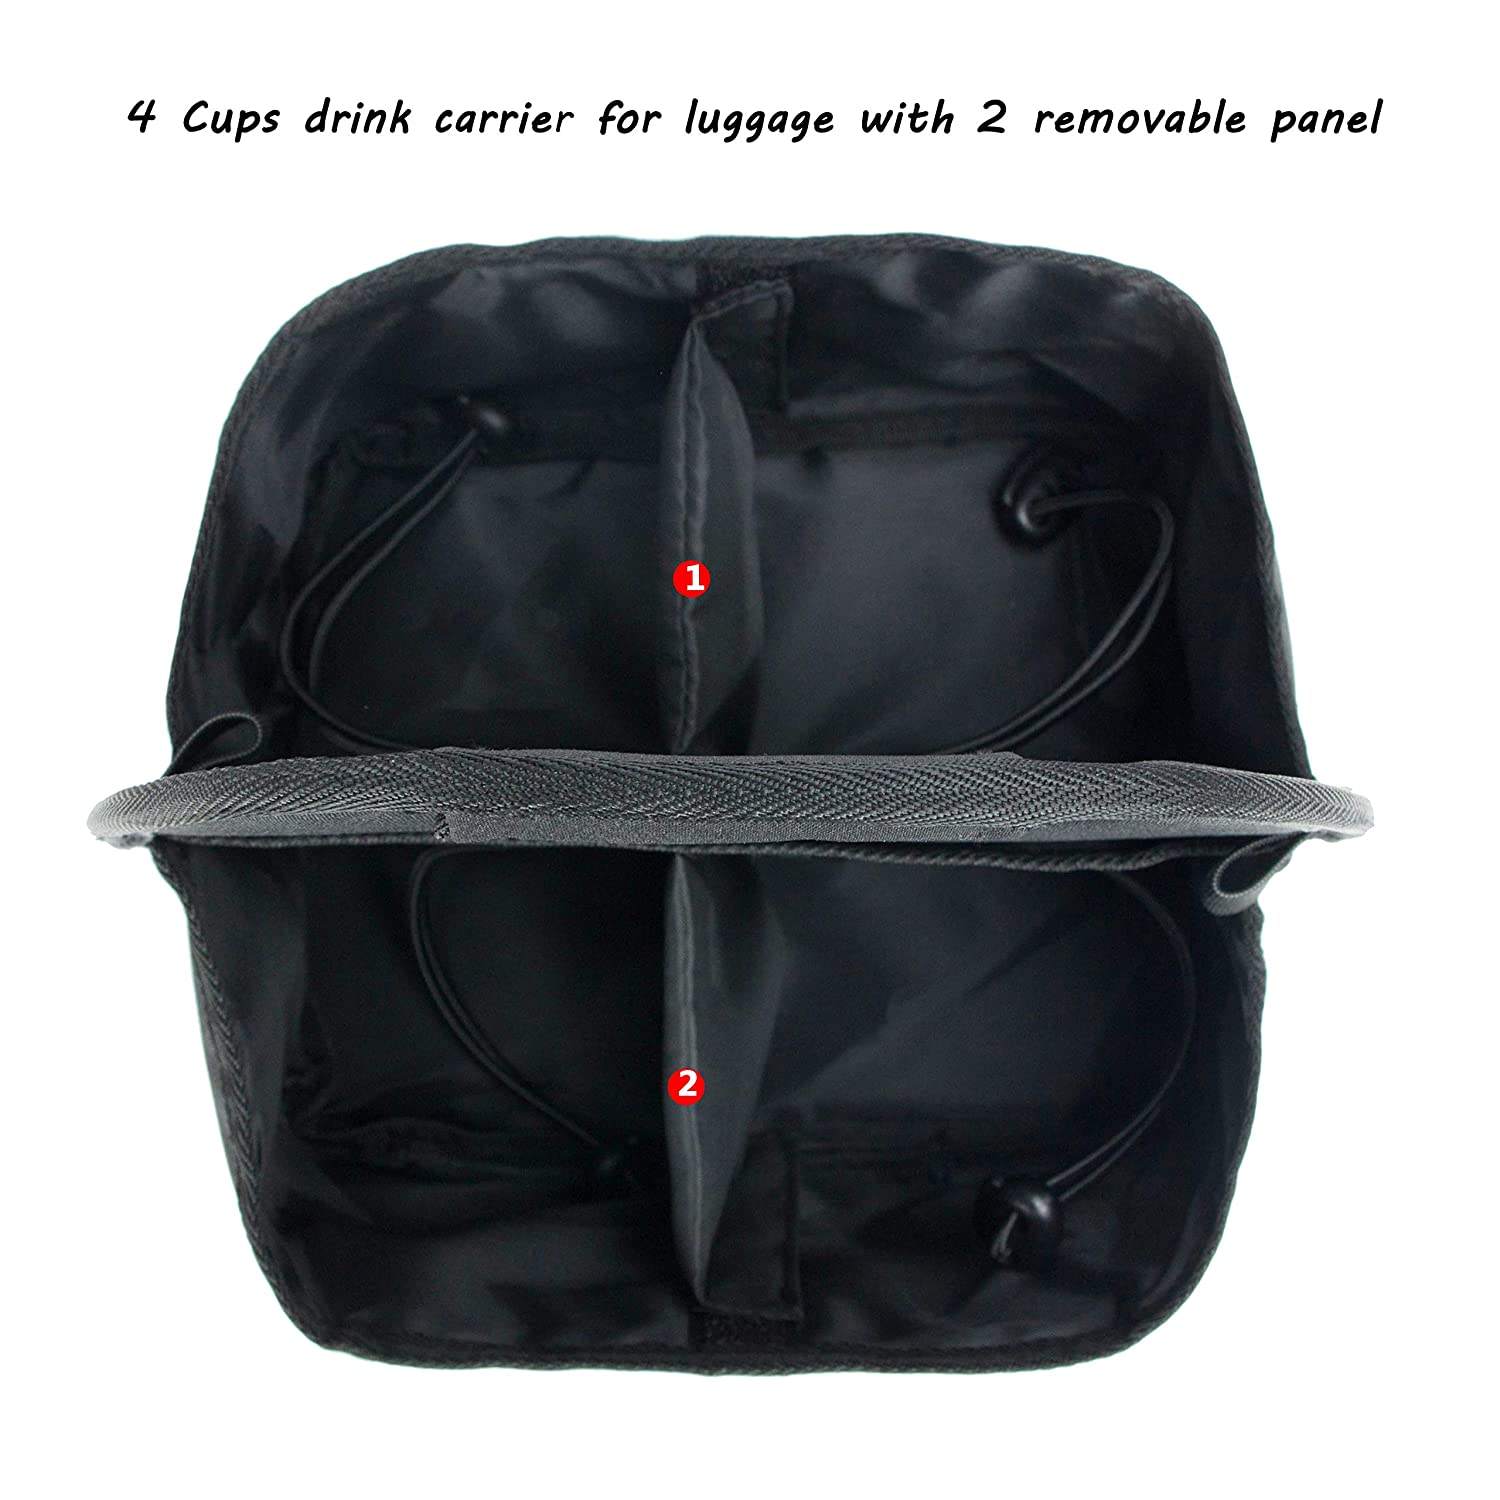 Luggage Travel Drink Bag Cup Holder Free Your Hand For Drink Beverages Coffee Fits All Suitcase Handles